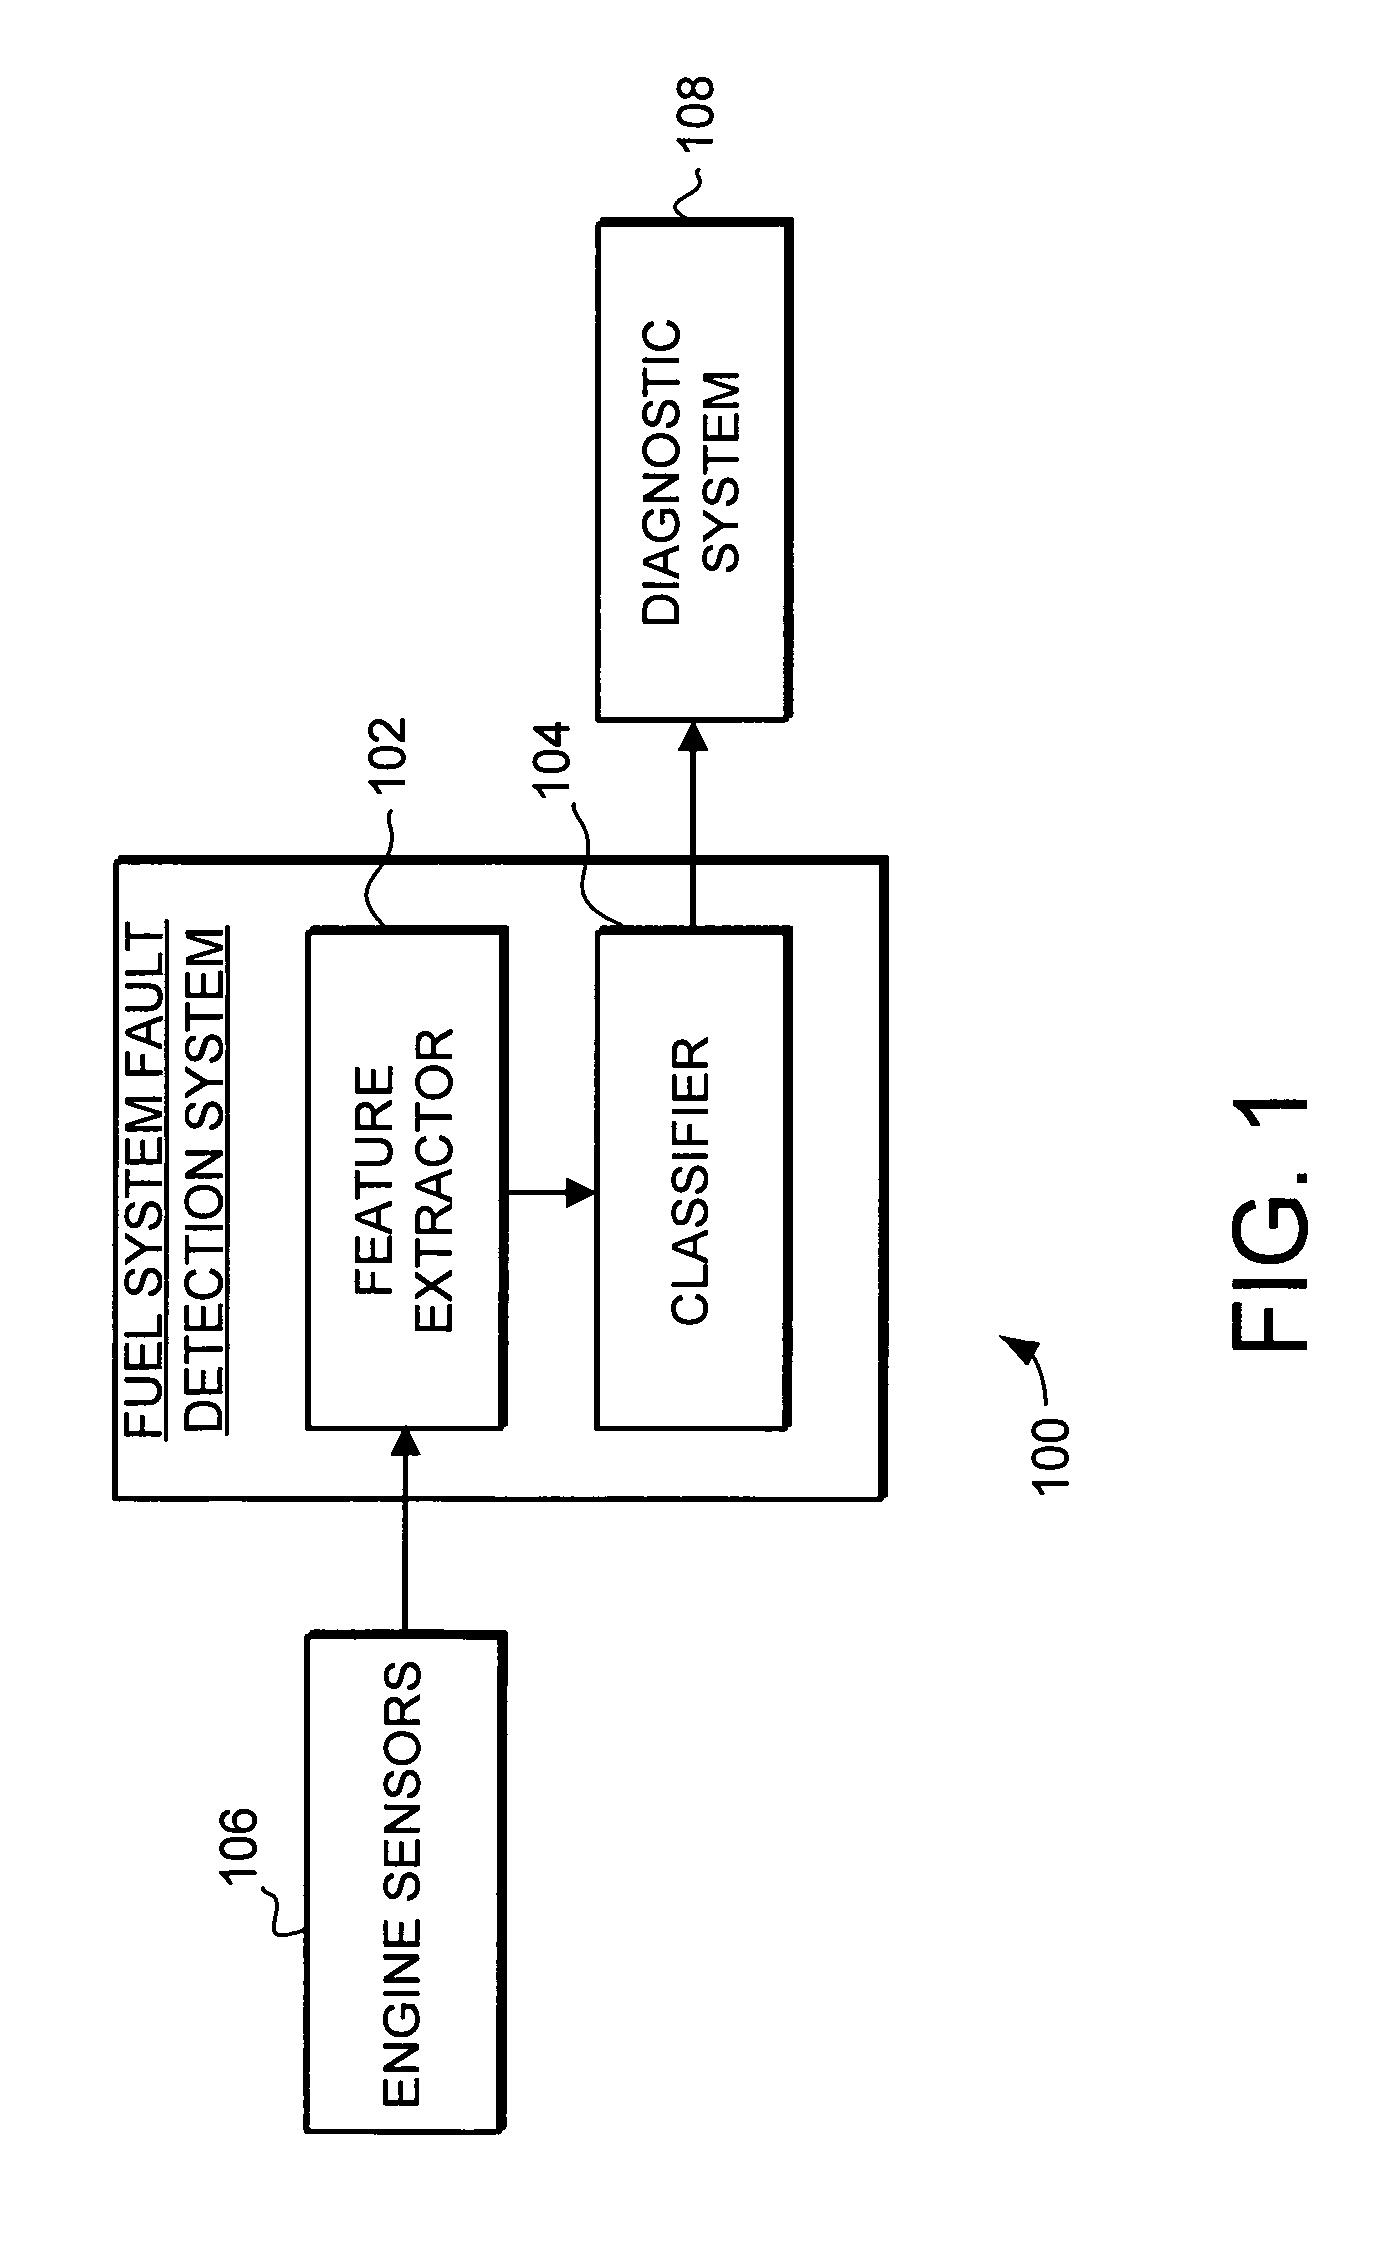 Fault detection system and method for turbine engine fuel systems